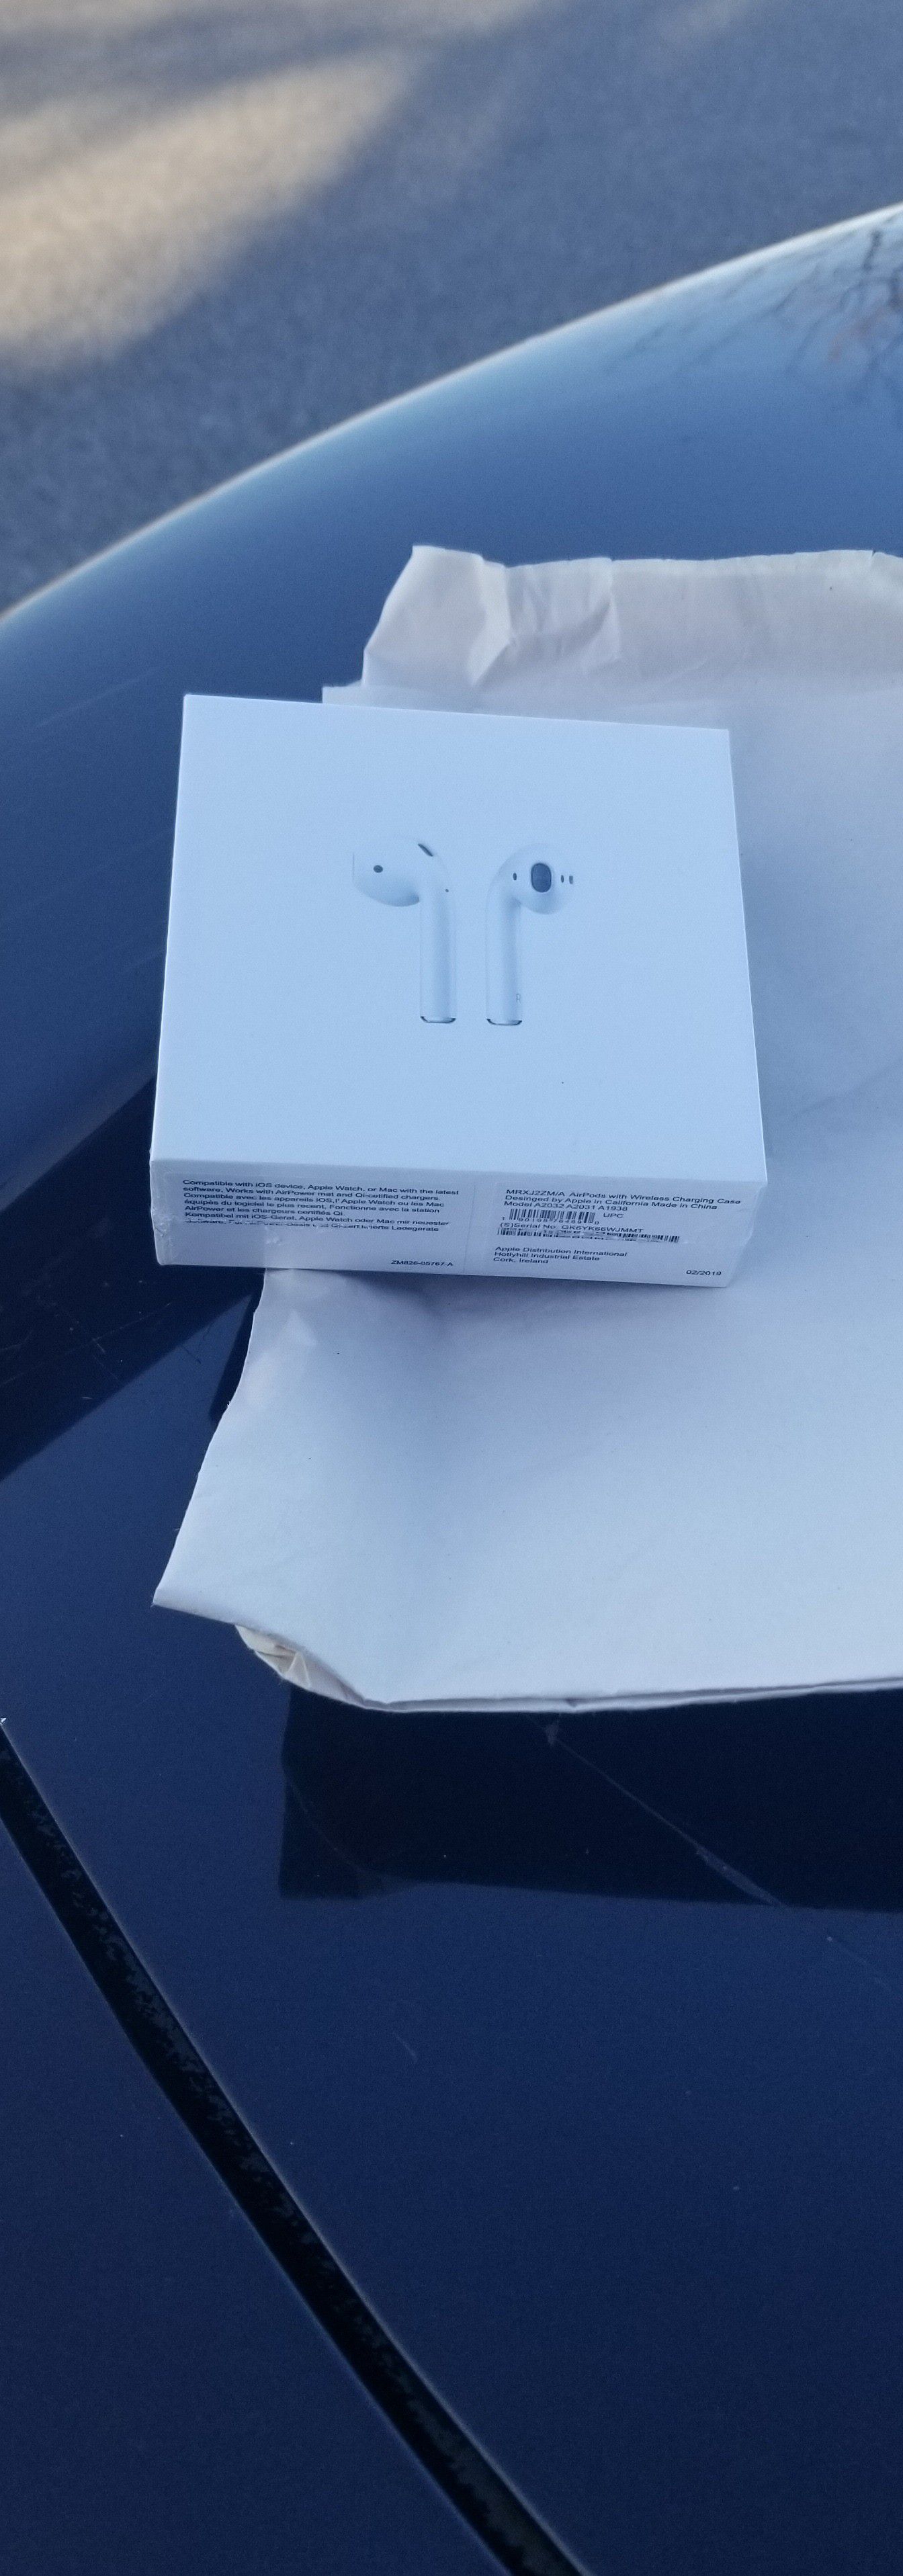 Apple Airpods 2nd generation with Wireless Charging Case